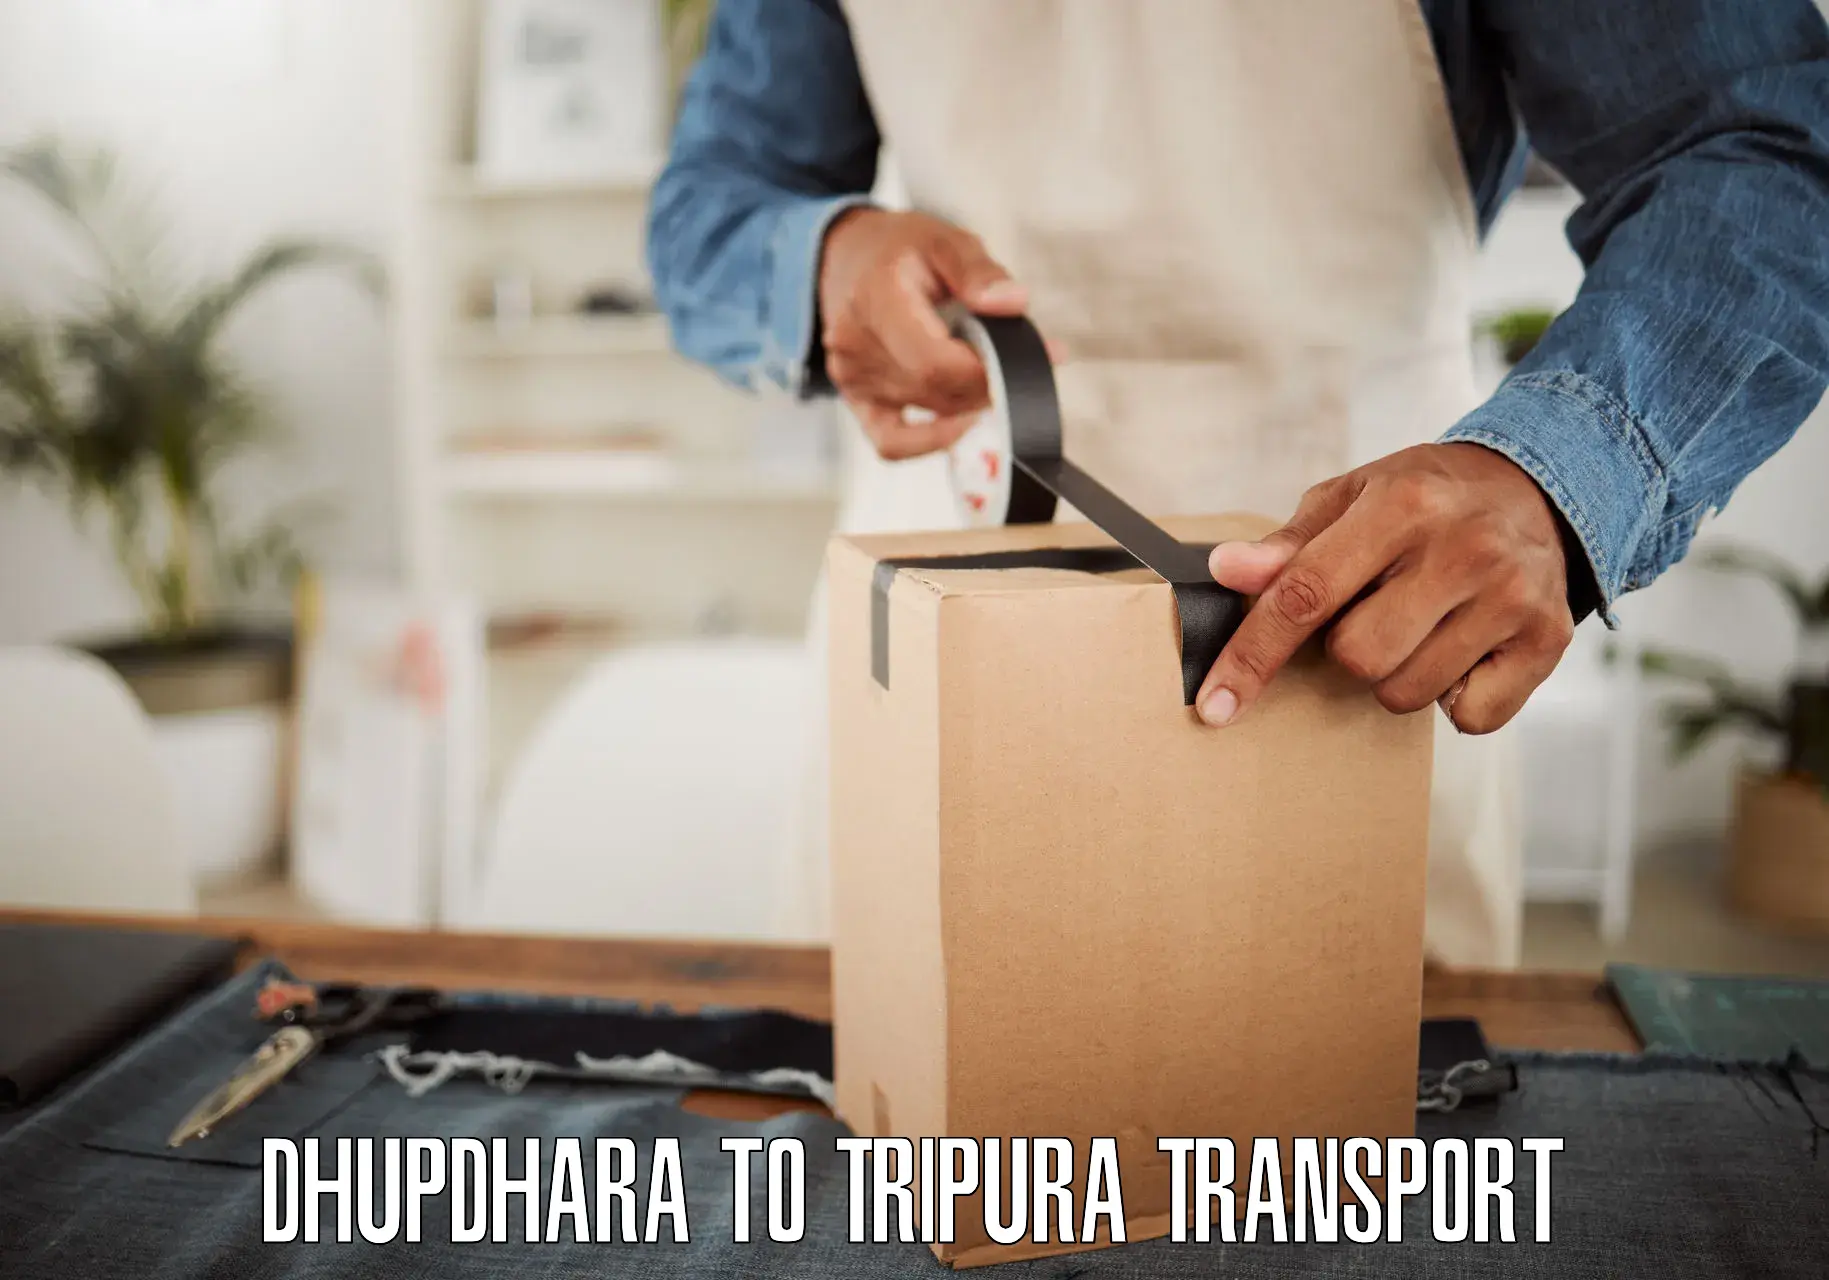 Daily parcel service transport Dhupdhara to South Tripura